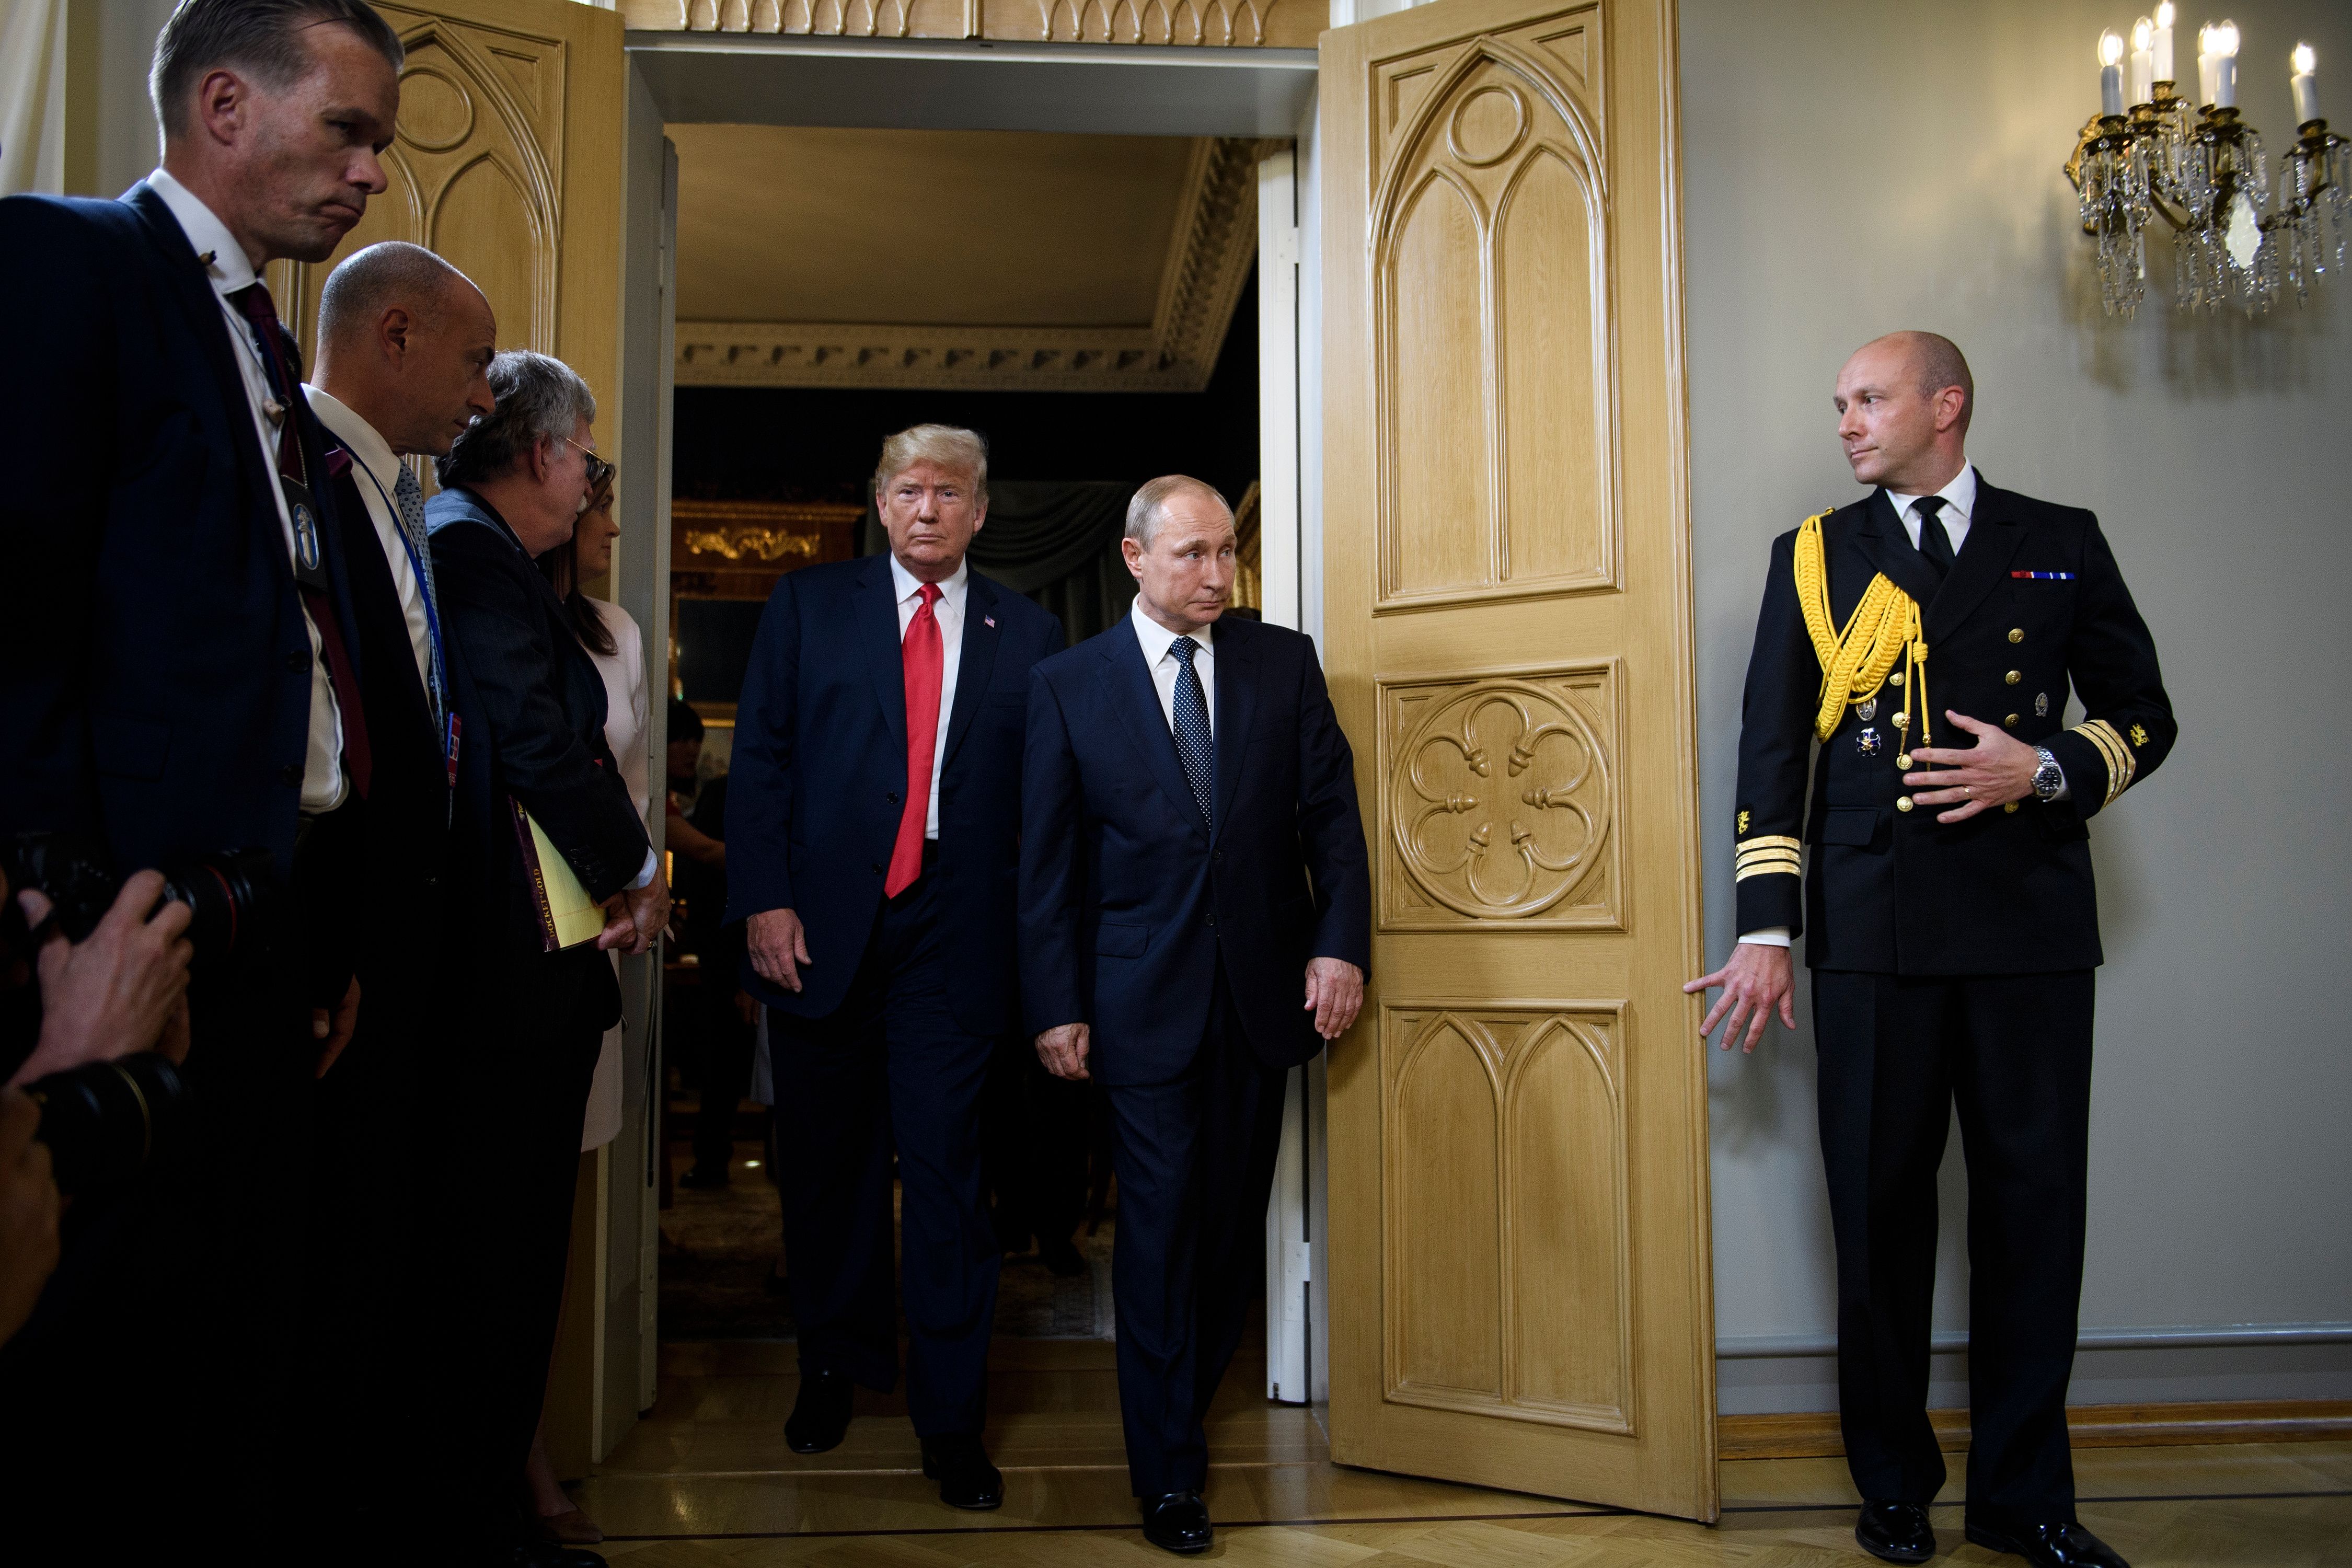 U.S. President Donald Trump and Russian President Vladimir Putin arrive for a meeting at Finland's Presidential Palace on July 16, 2018 in Helsinki, Finland. (Brendan Smialowski—AFP/Getty Images)